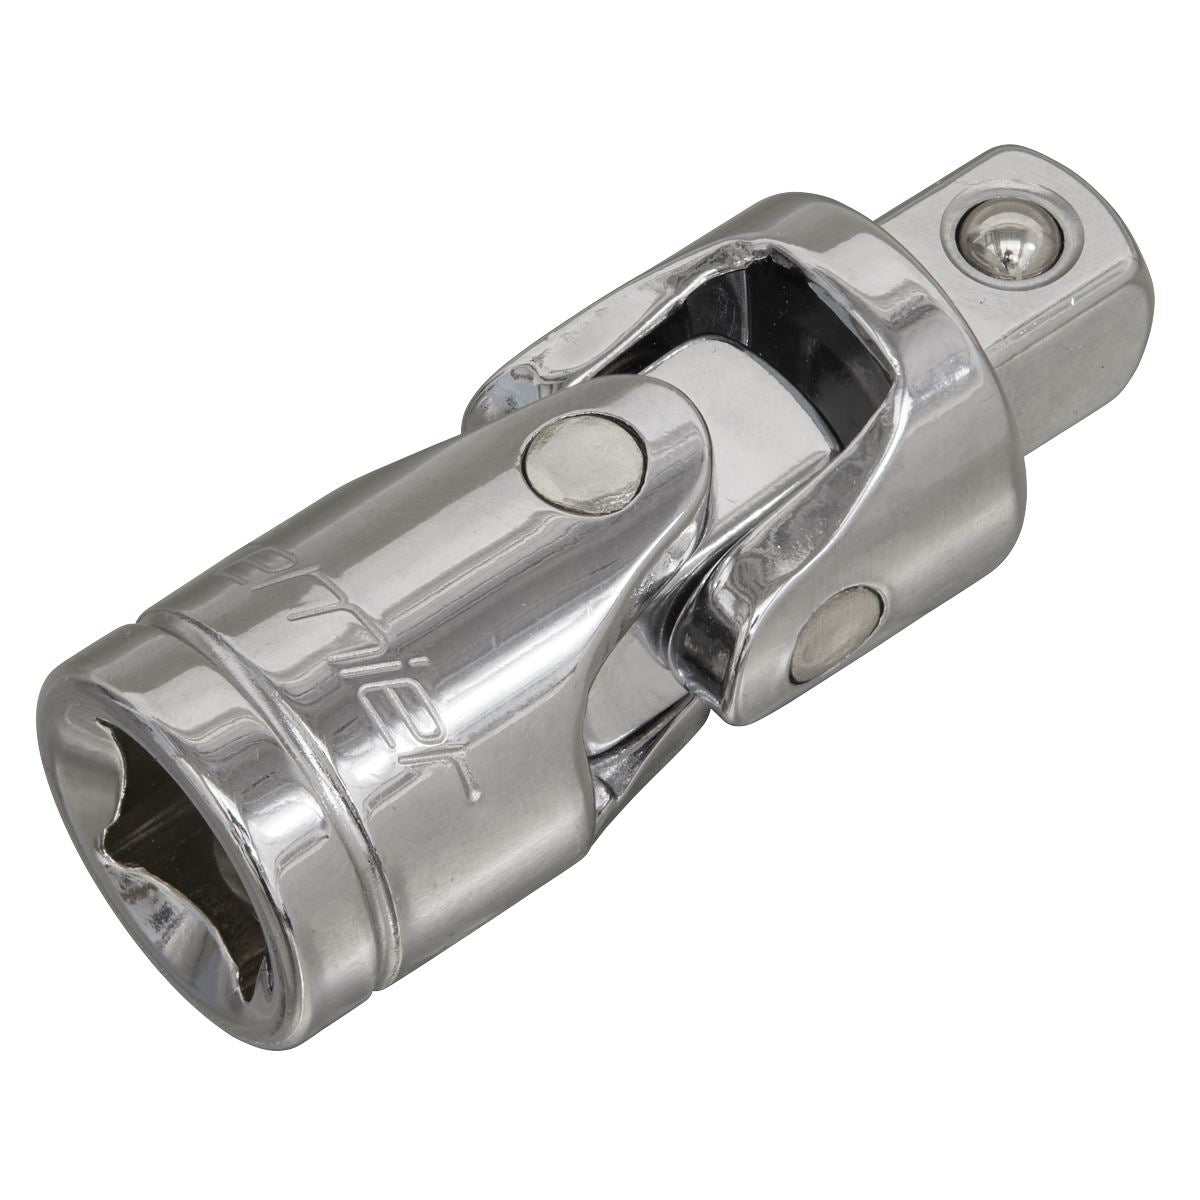 Sealey Premier Universal Joint 3/8"Sq Drive